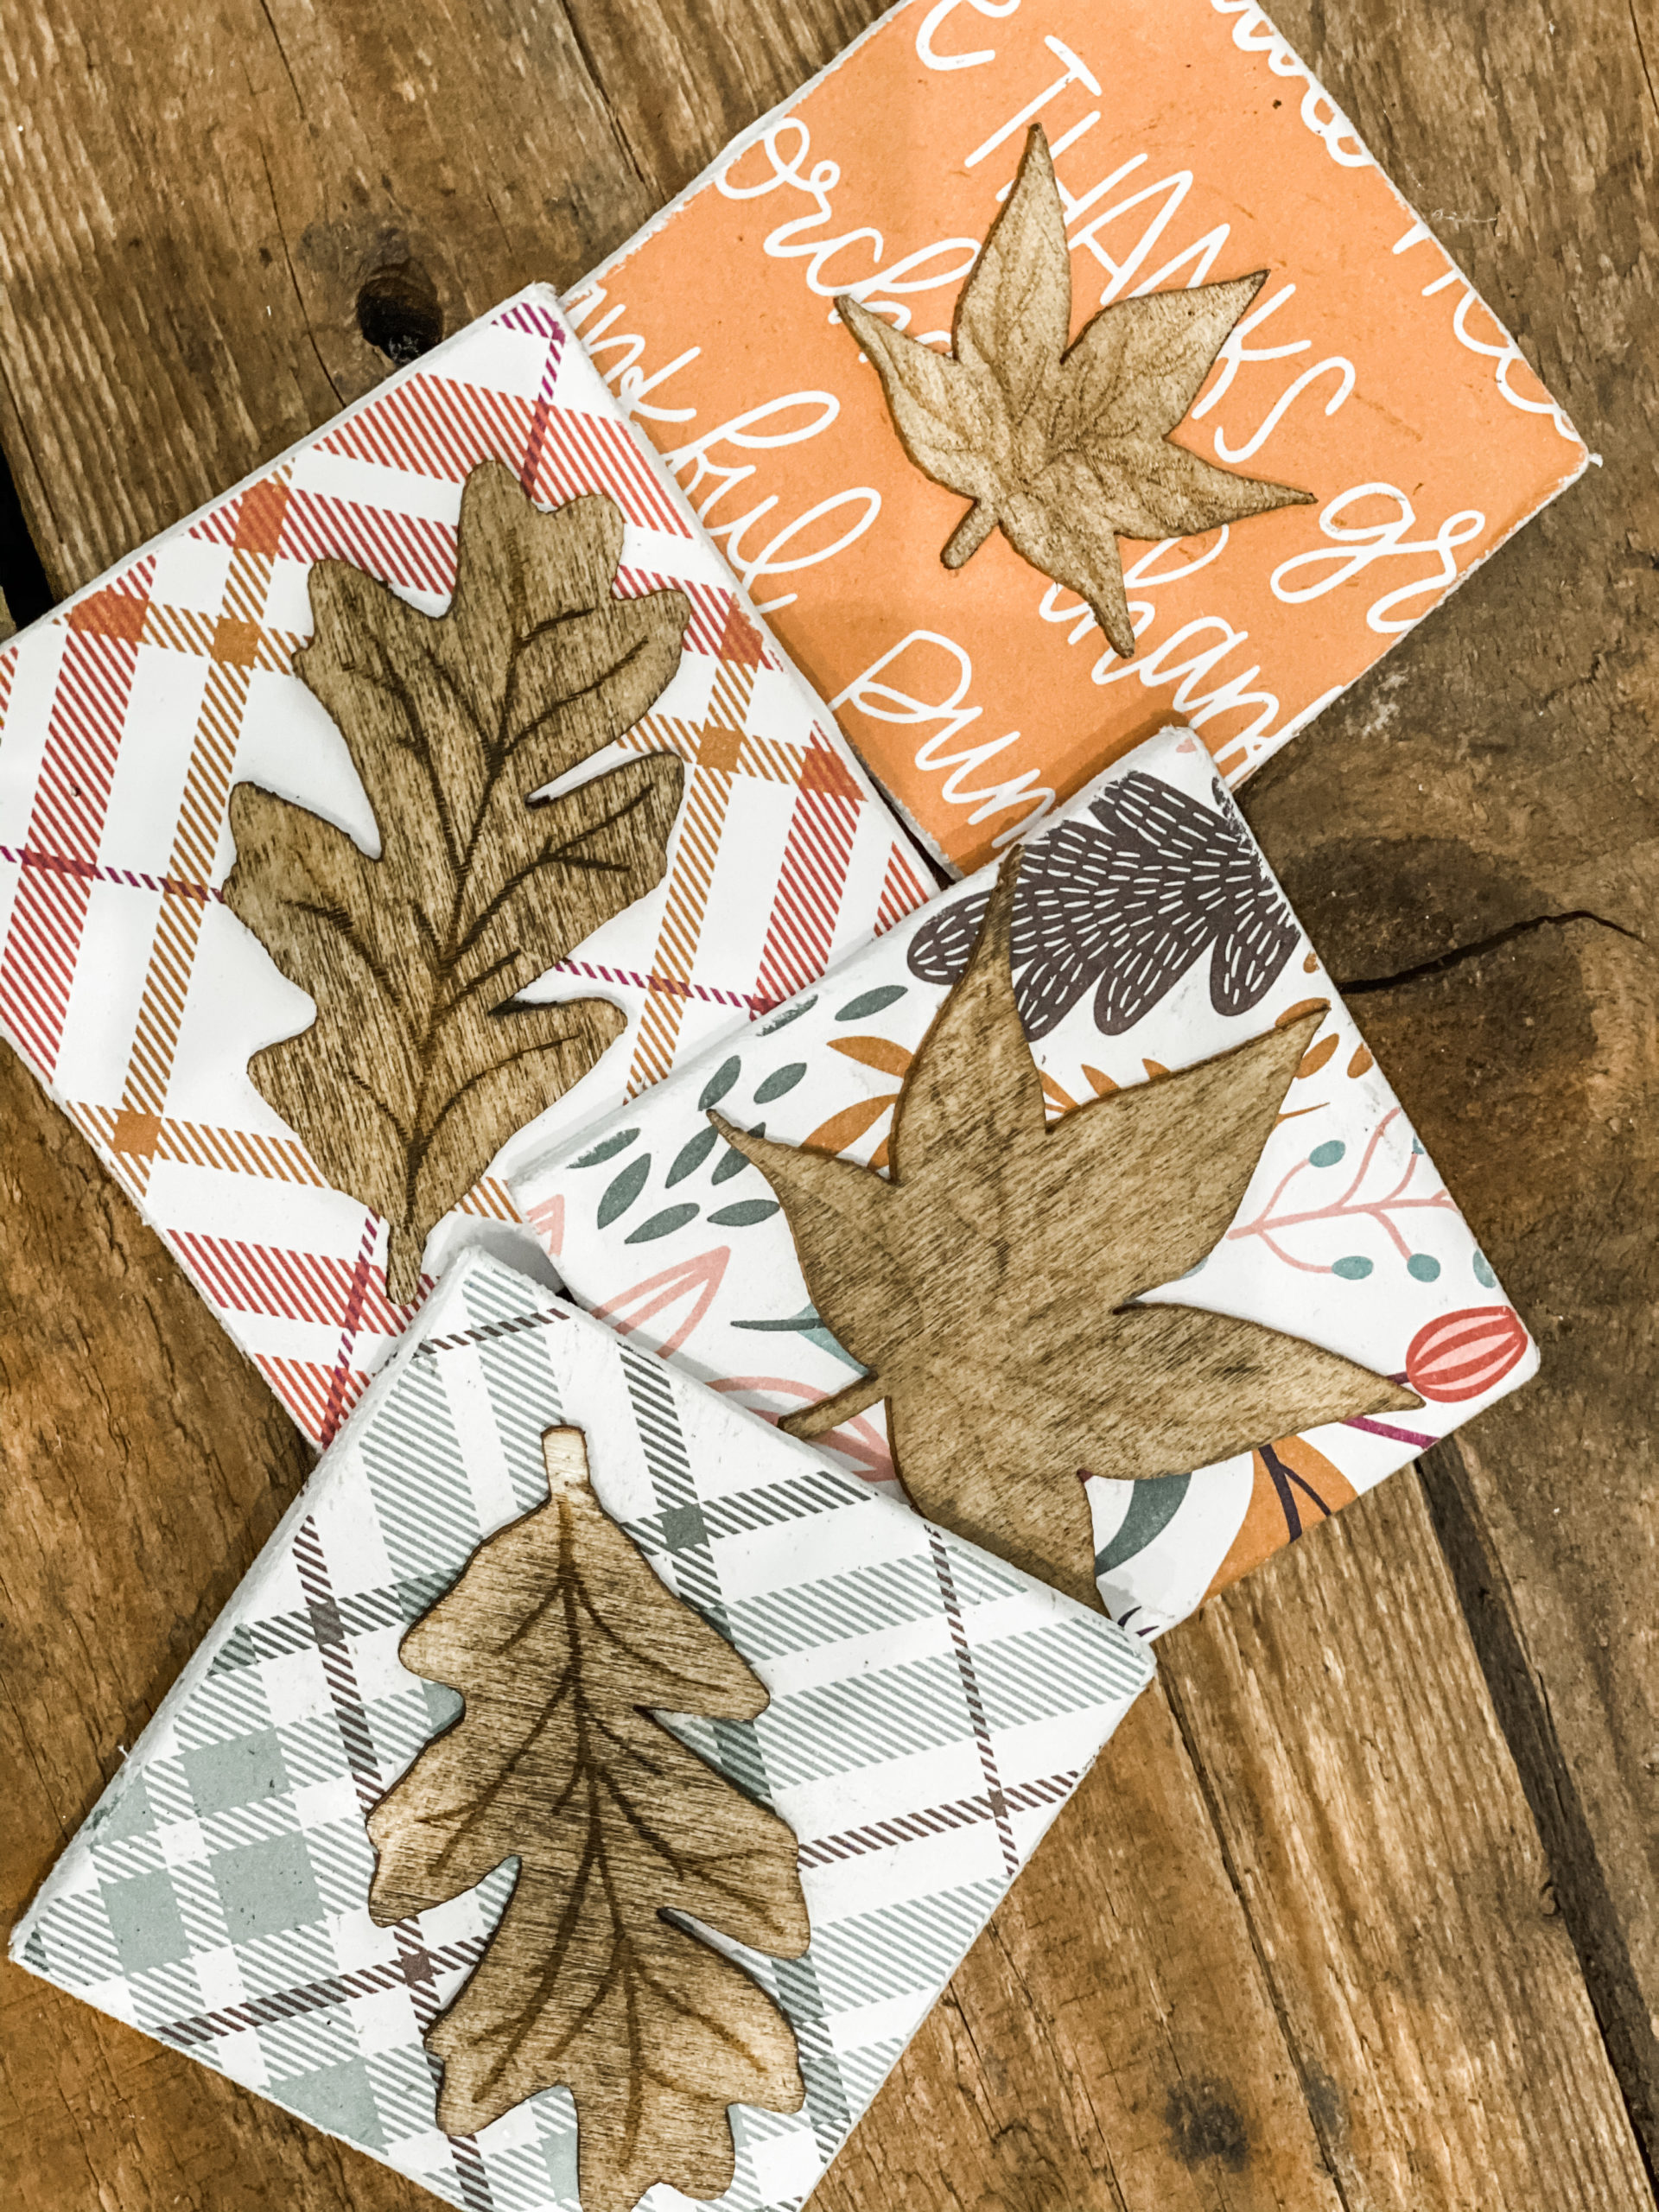 diy fall magnets - Re-Fabbed